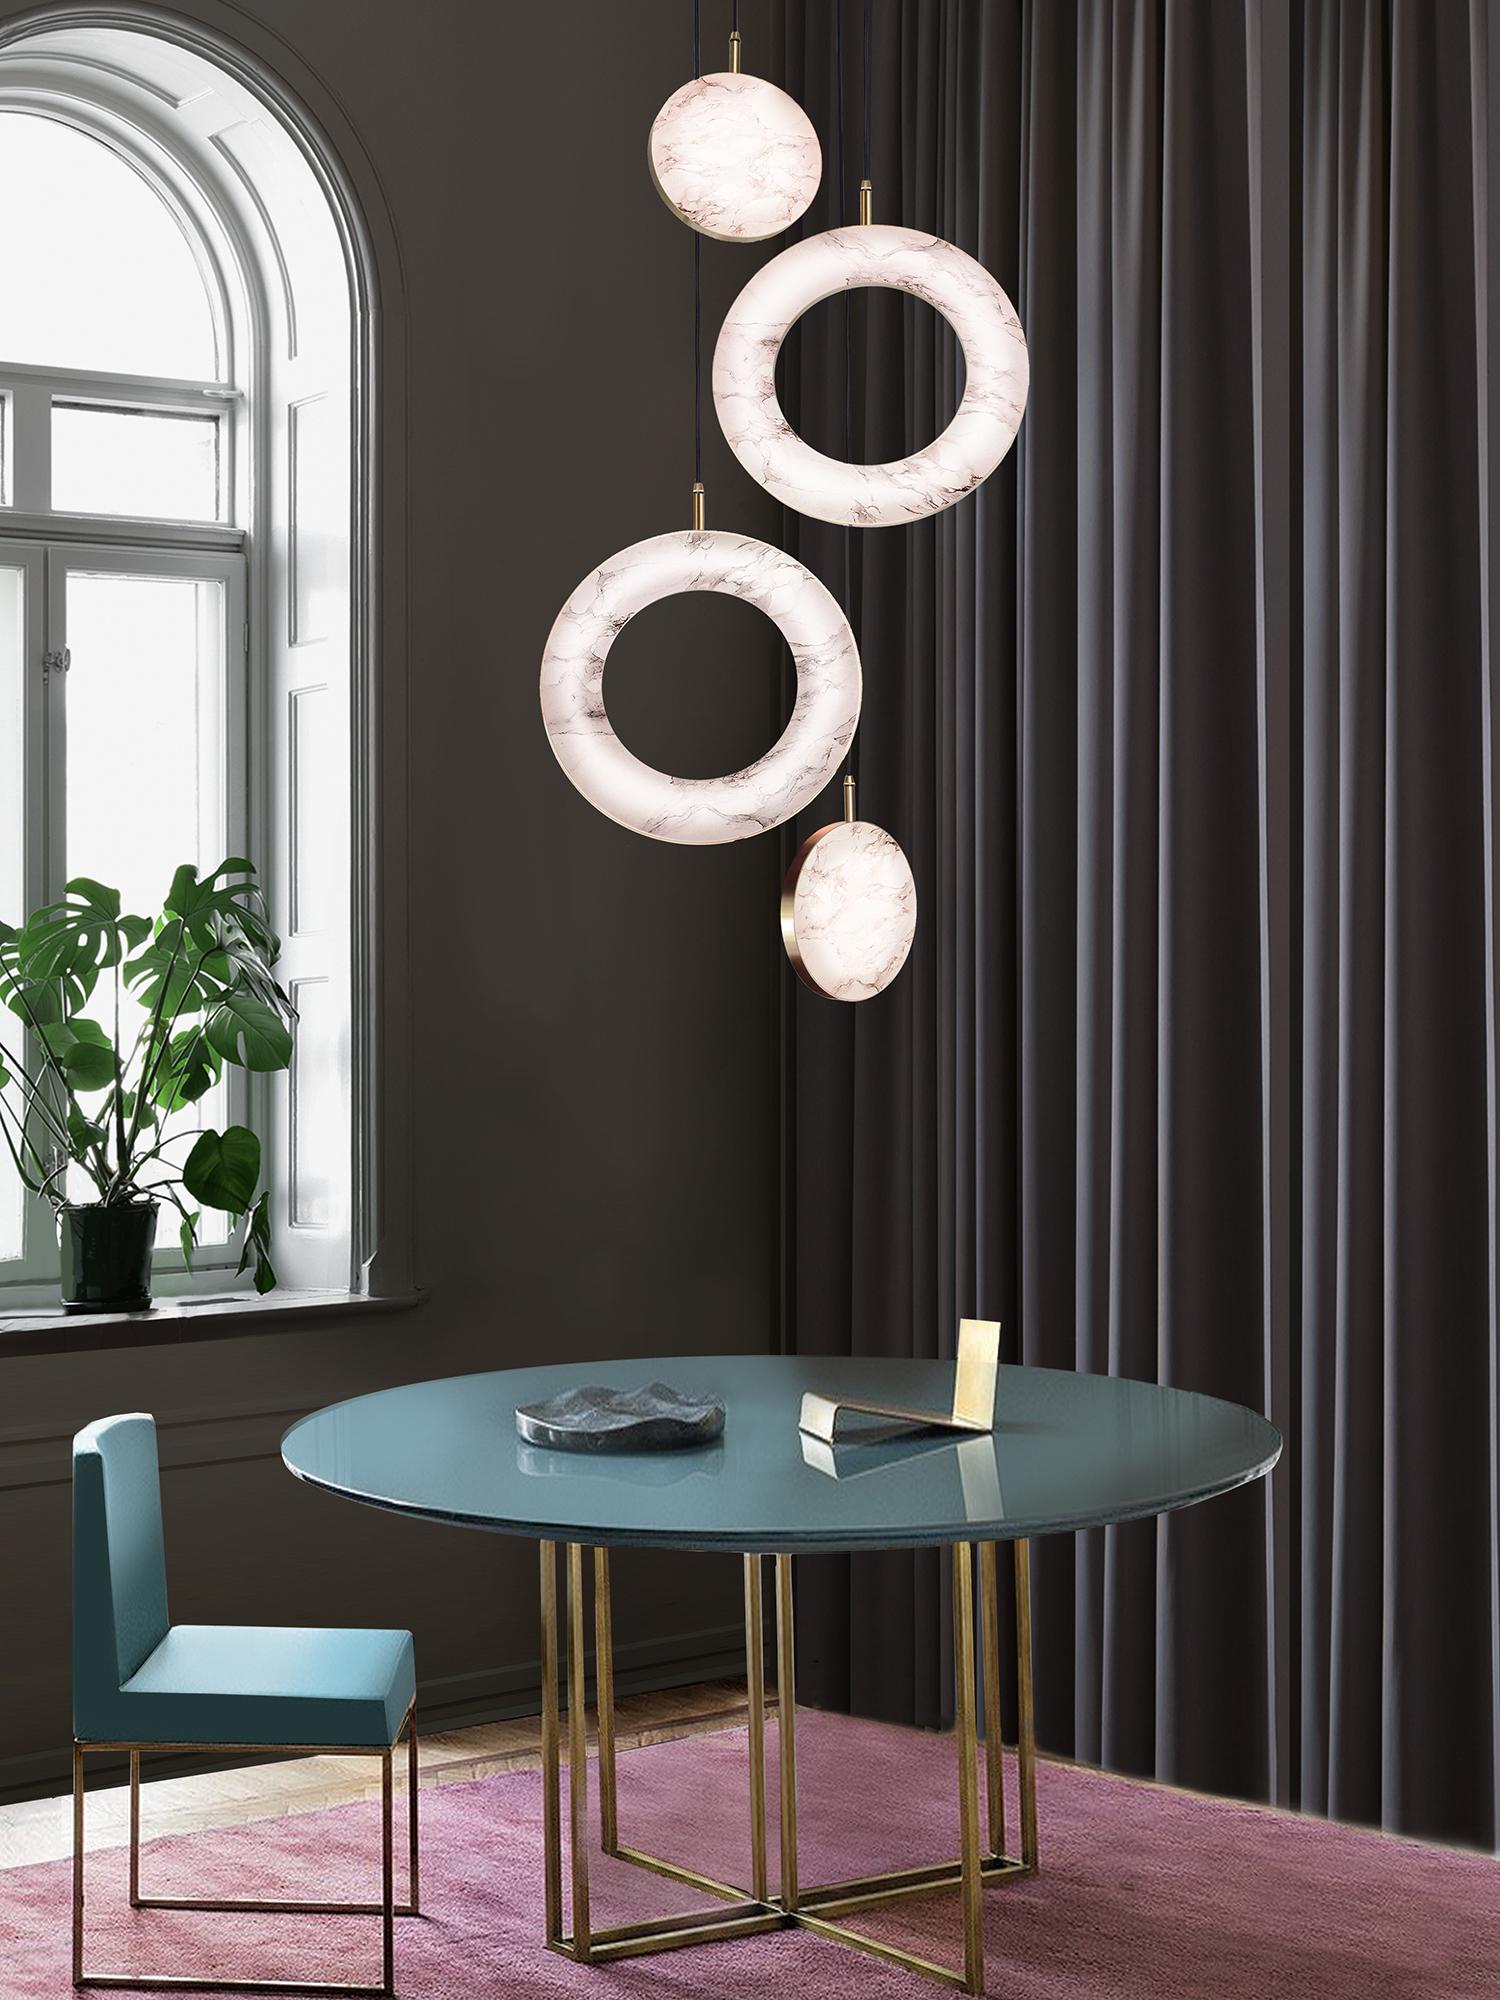 The Rosa Rings collection was designed to showcase the opaque beauty of natural marble. The pendant incorporates a backlit Rosa Estremoz marble disc that emits a soft, warm illumination, pierced by the natural veining of the stone.

Integrated